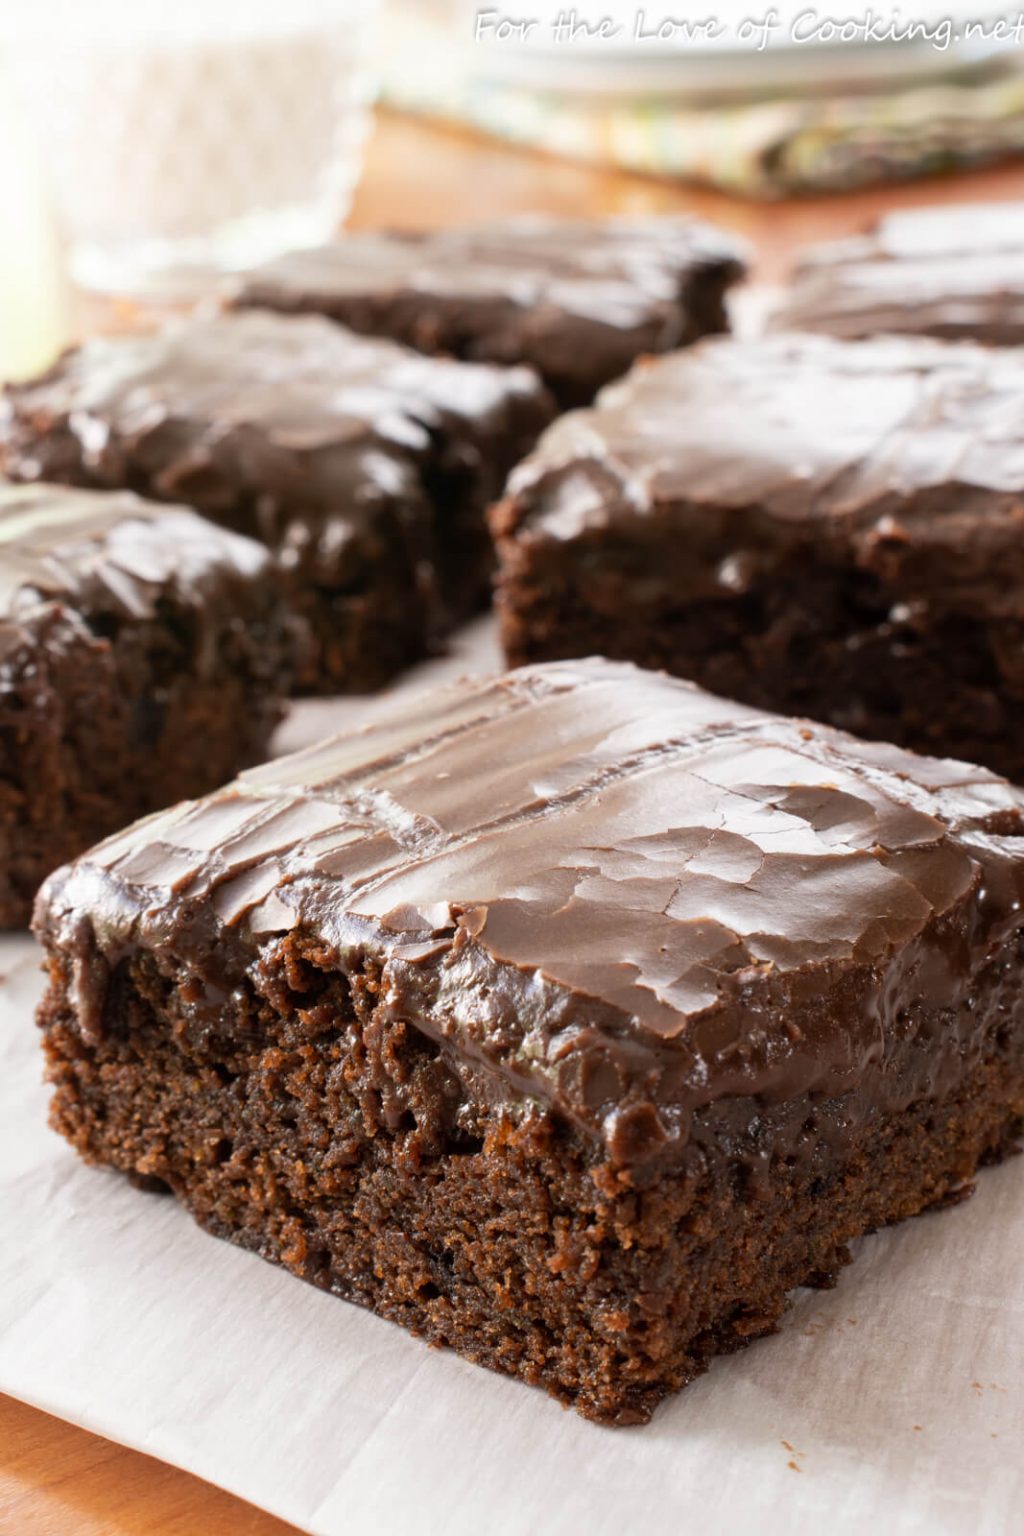 Chocolate Zucchini Brownies | For the Love of Cooking